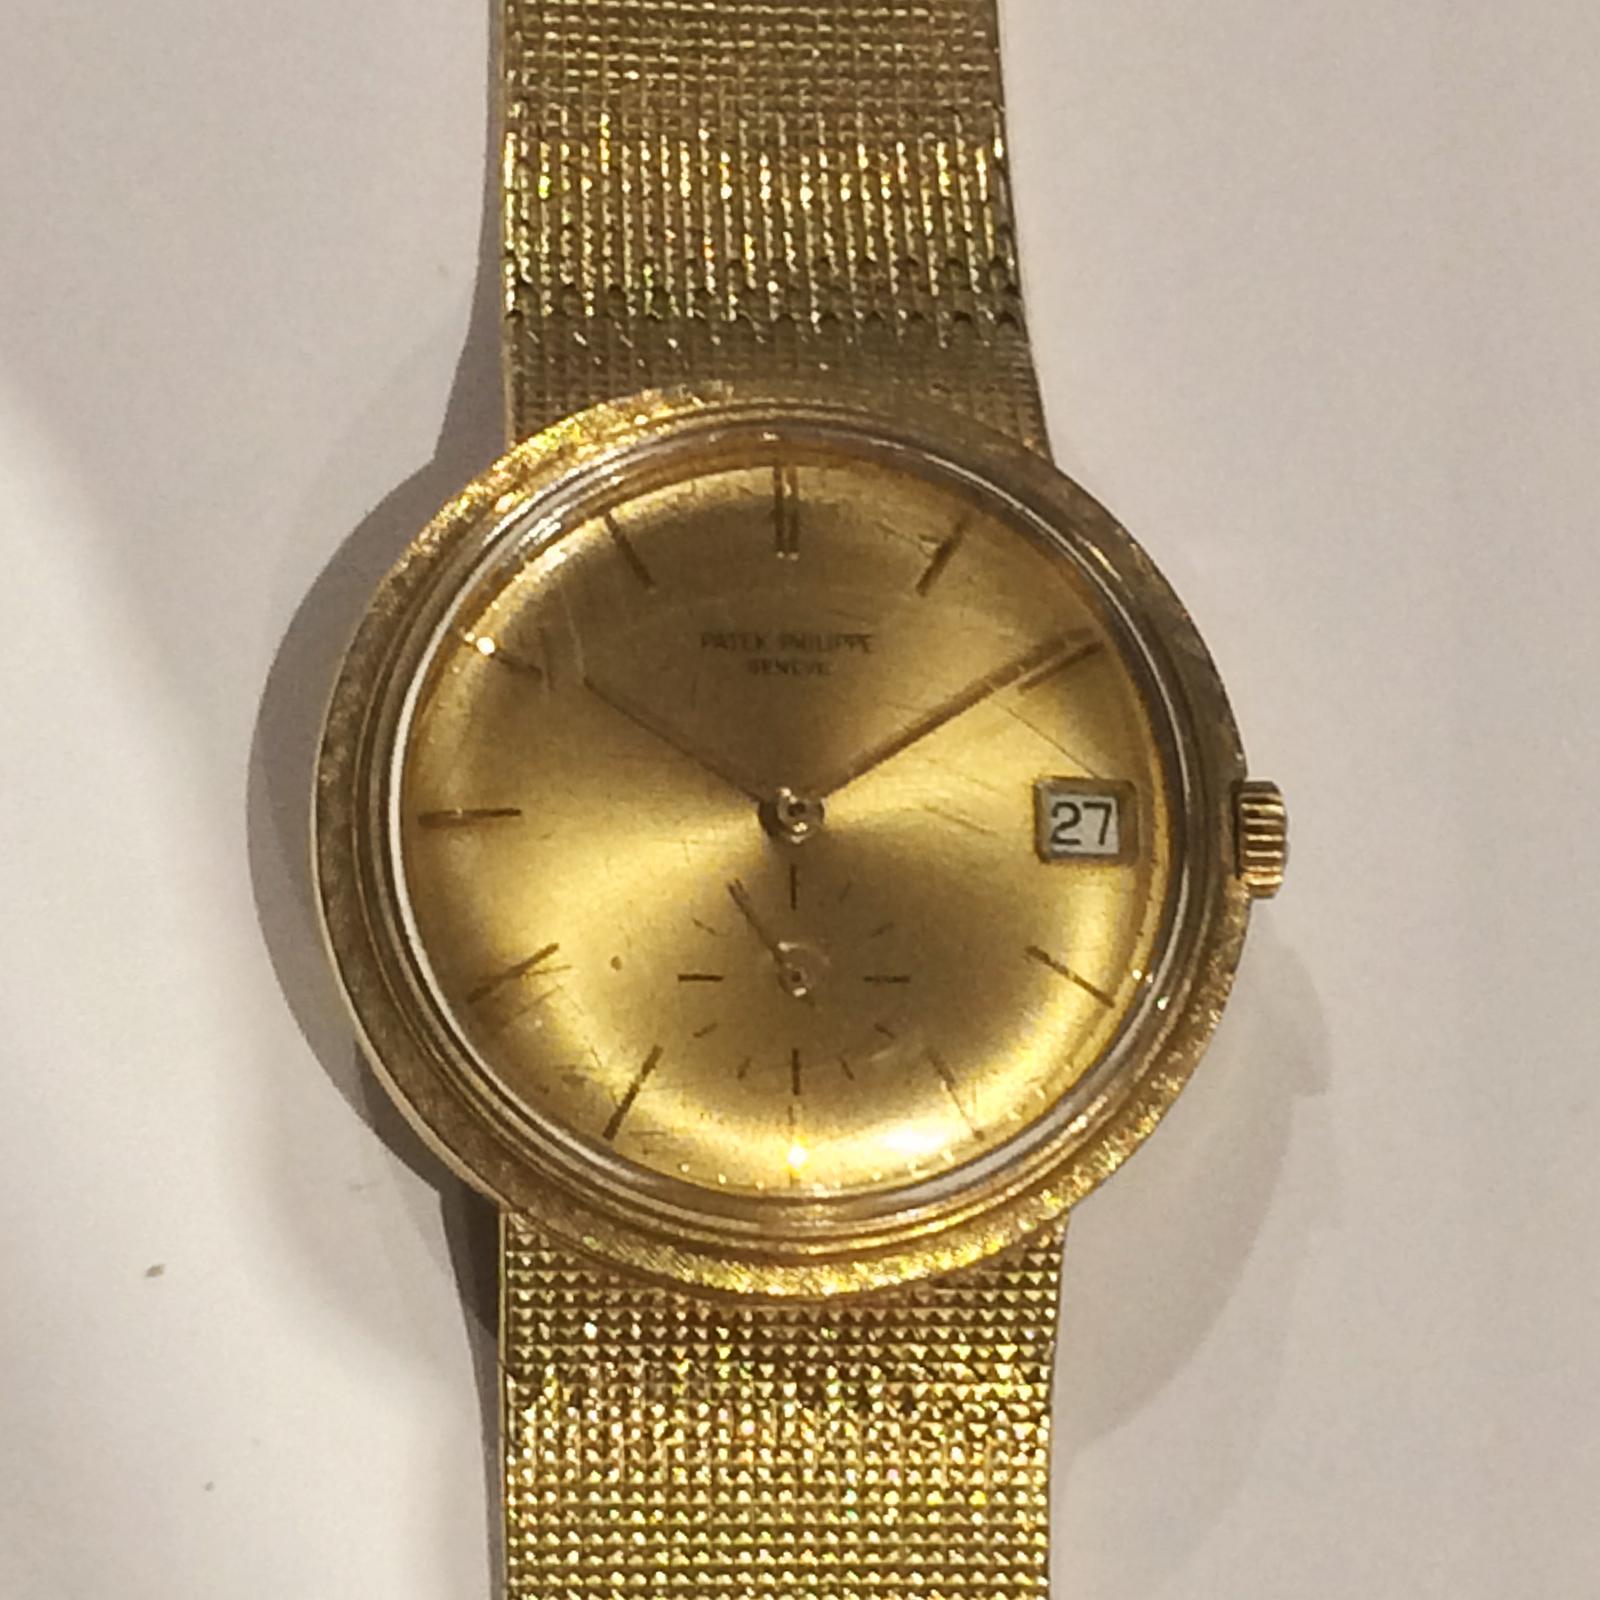 Automatic circular case with gold Dial, gold applied baton numerals, subsidiary Seconds dial and Date aperture. Case, Dial, and bracelet signed. Screw back with Octagon (10 side surround) screw access plate, with tapered mesh bracelet with textured